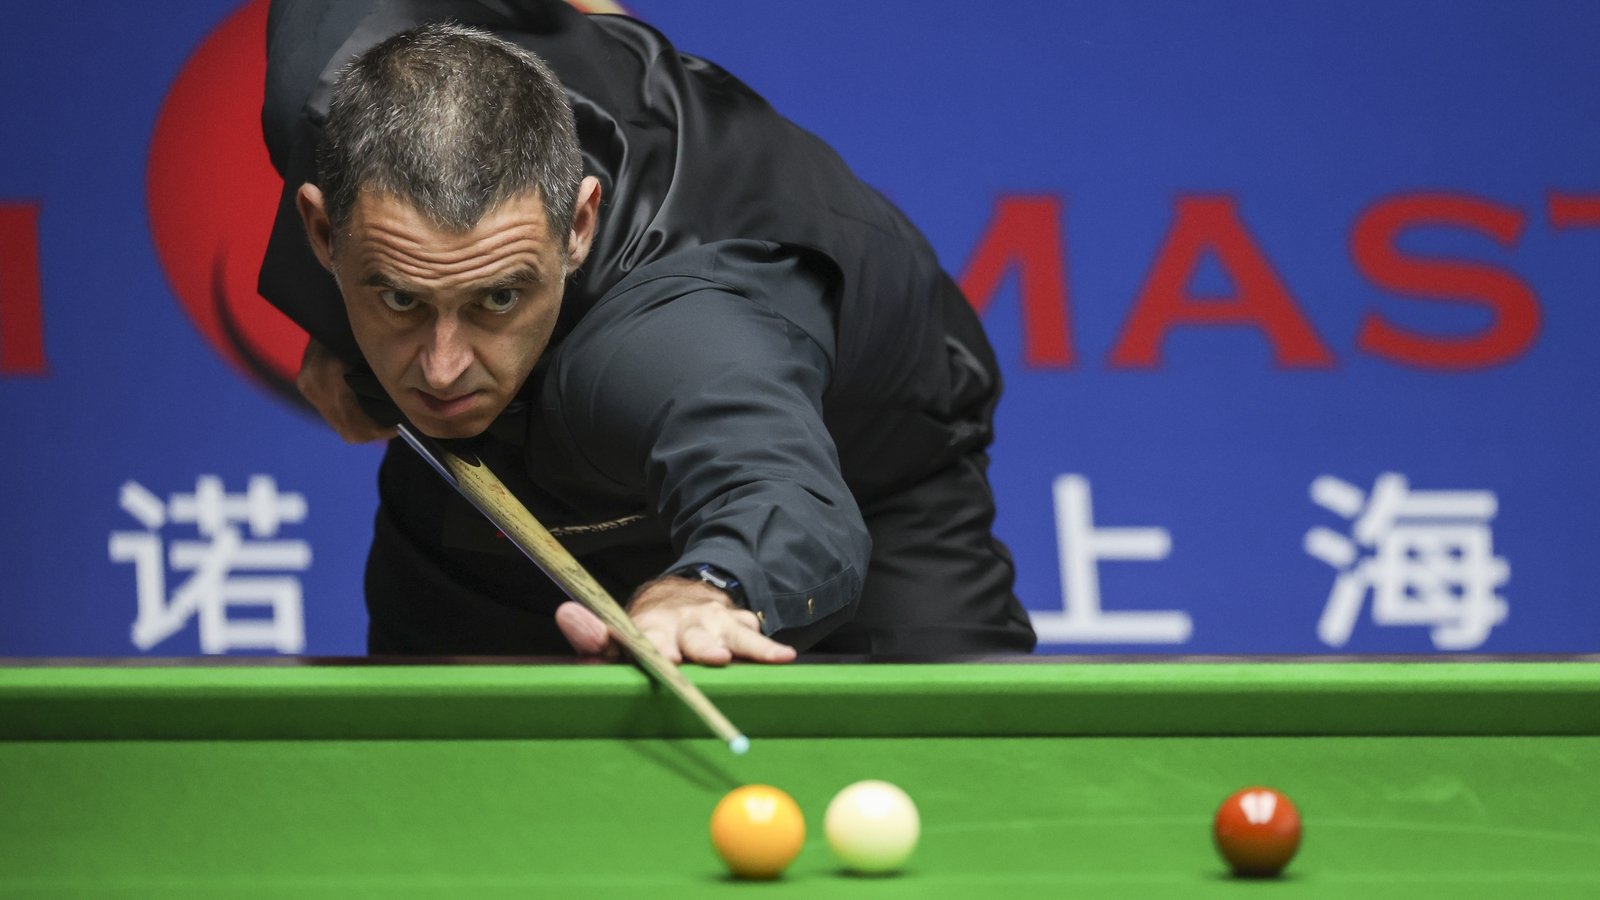 OSullivan gets Carter to ease into Shanghai quarters